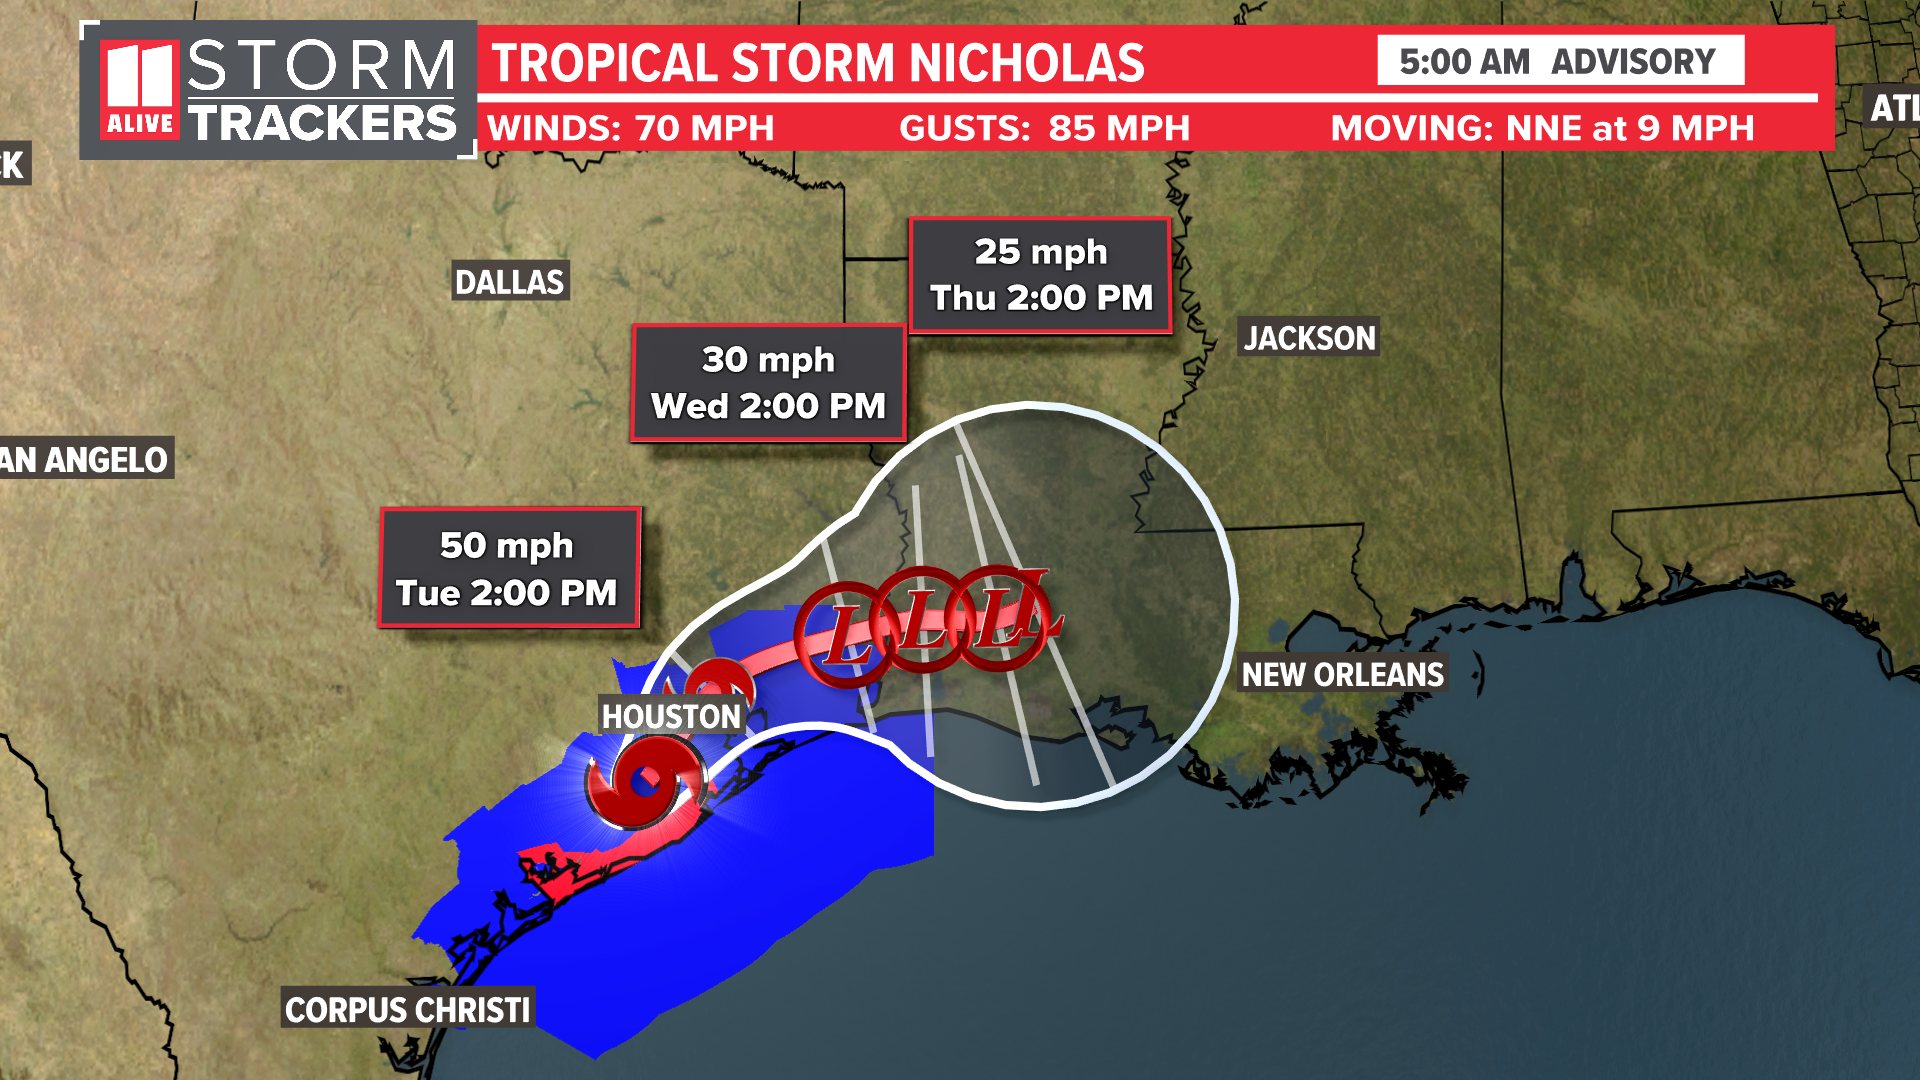 Nicholas still has winds of 70 miles per hour with gusts to 85 miles per hour. Inland flooding becomes the main concern as the storm moves slowly along  the I-10